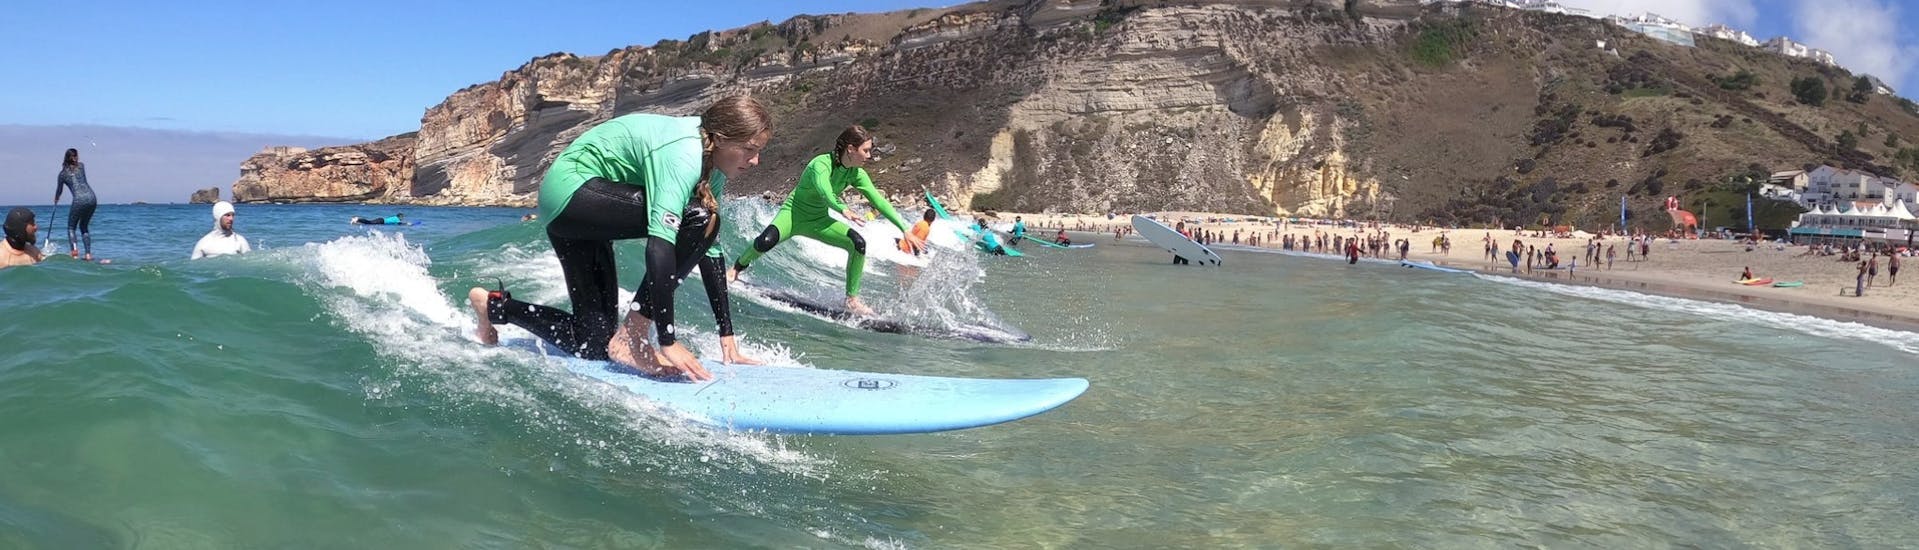 Two people riding a wave during the Private Surf Lessons (from 6 y.) in Nazaré - All Levels with Zulla Surf School Nazaré.